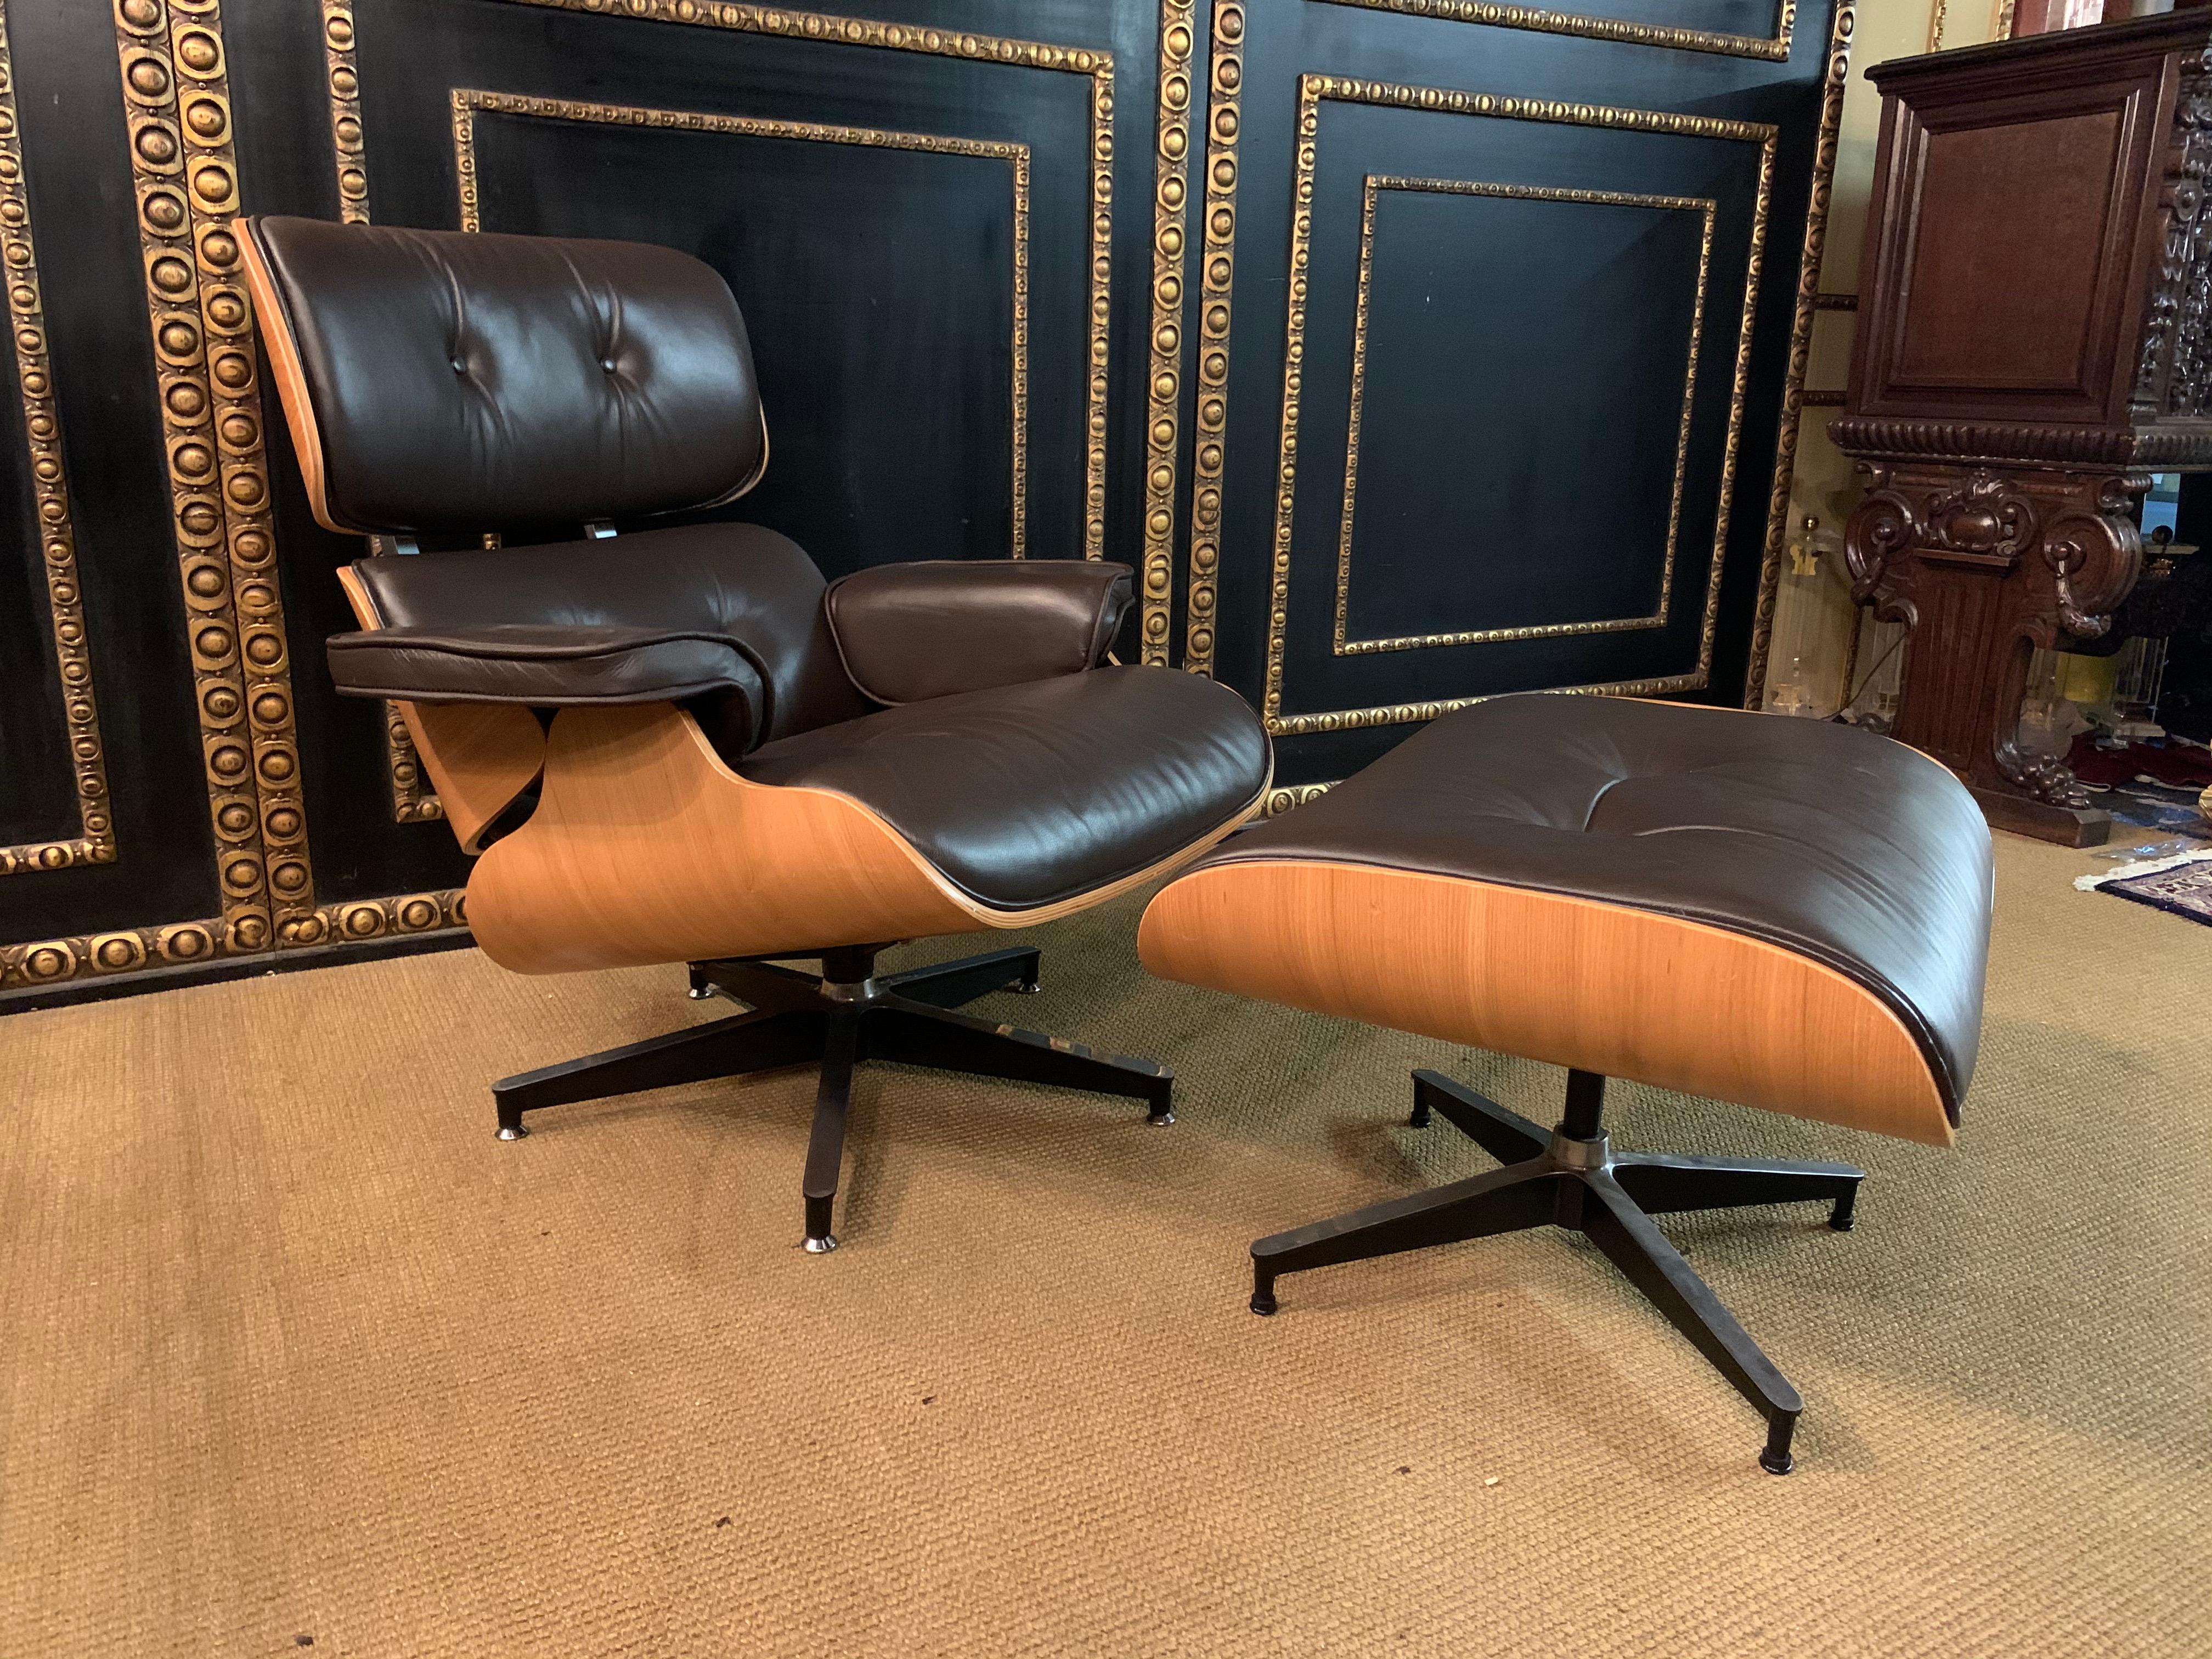 Charles Eames lounge chair style (Replica) fine leather, with ottoman.
finest Italian quality.

Like the original, all parts are removable and the leather is with a decorative closure to open.